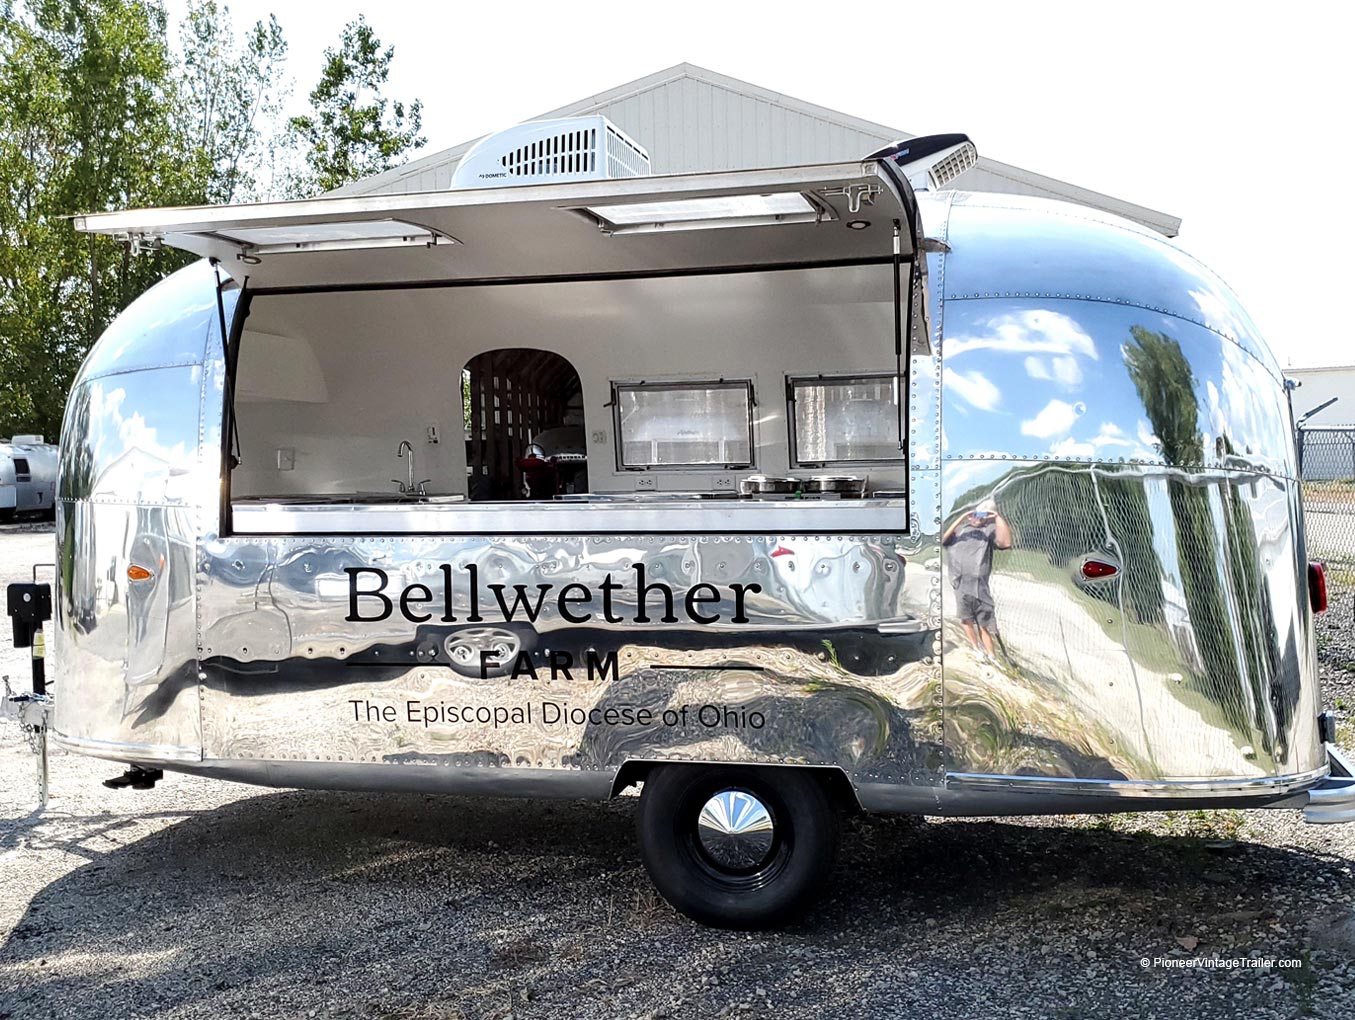 Bellwether Farm soup/sandwich Airstream serving trailer